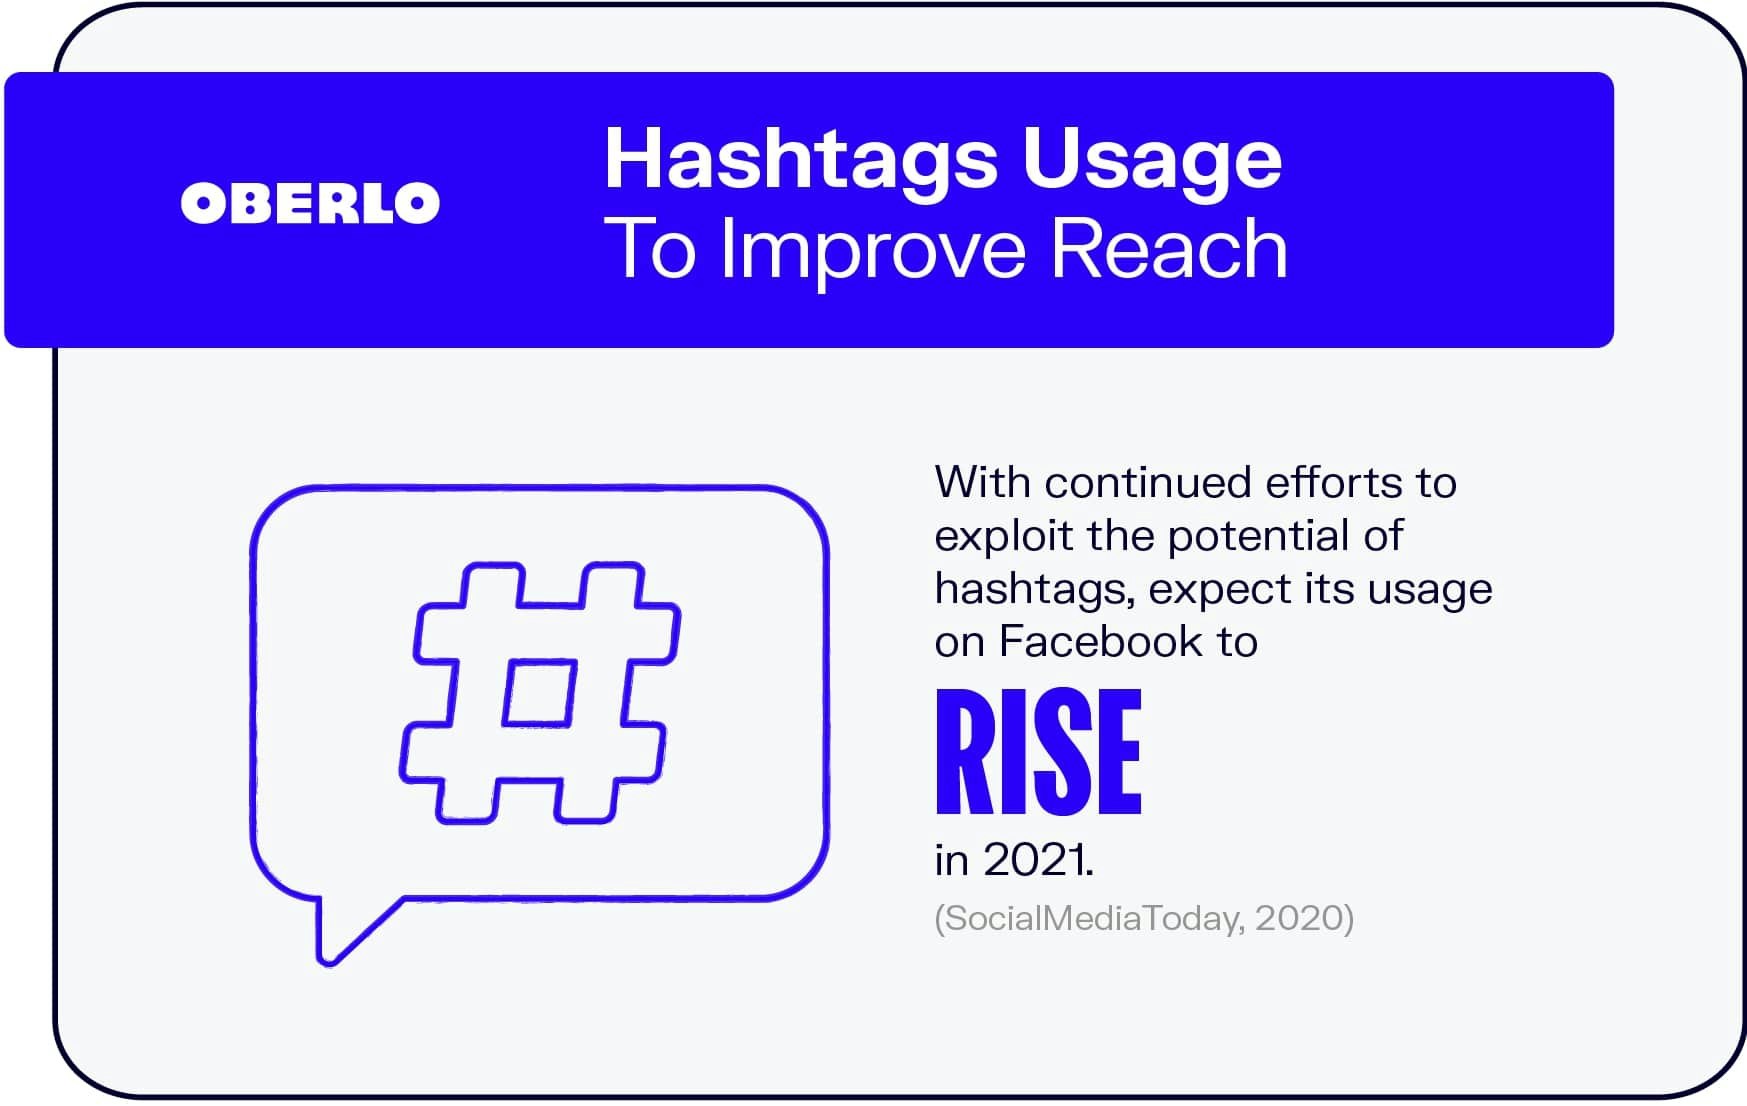 Hashtags Usage To Improve Reach